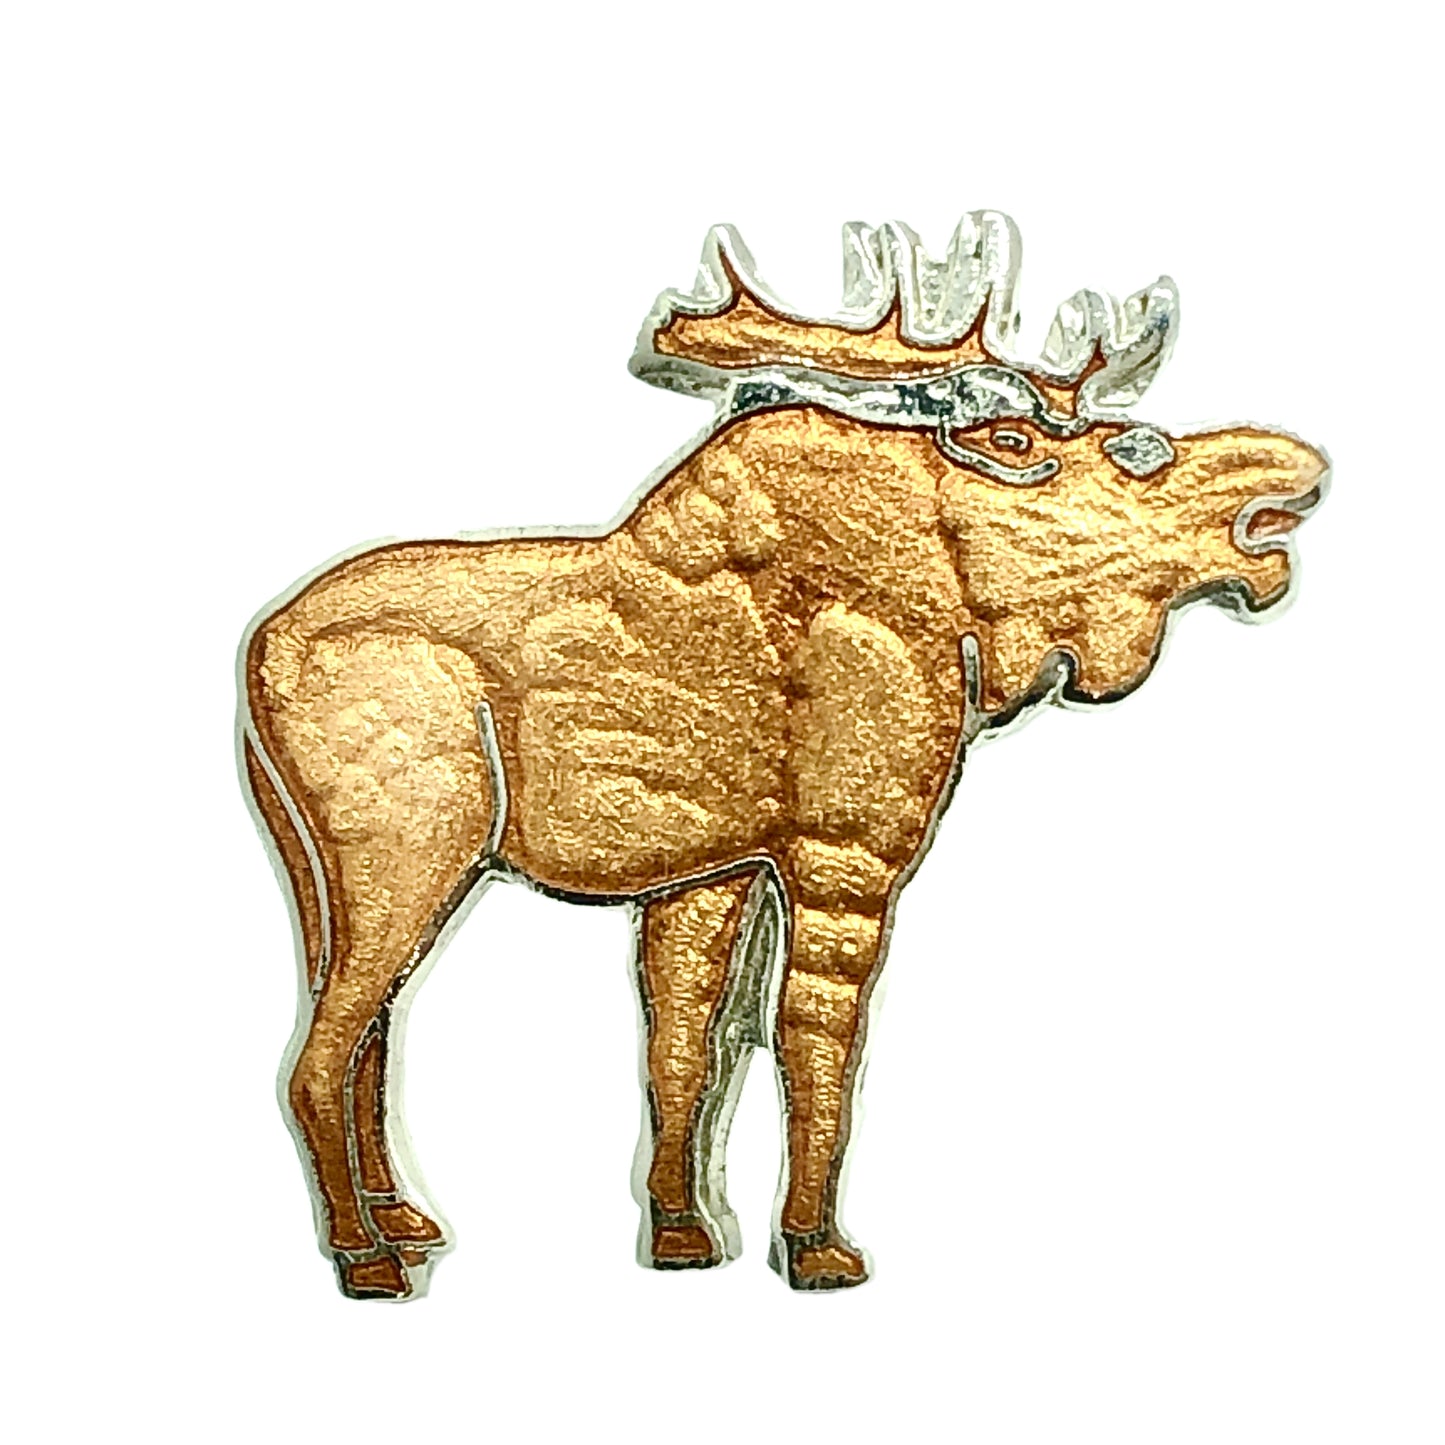 Brooches & Lapel Pins | Vintage Shimmery Brown Enamel Moose Tie Tack, Lapel Pin, Brooch | Discount Estate Jewelry at Blingschlingers